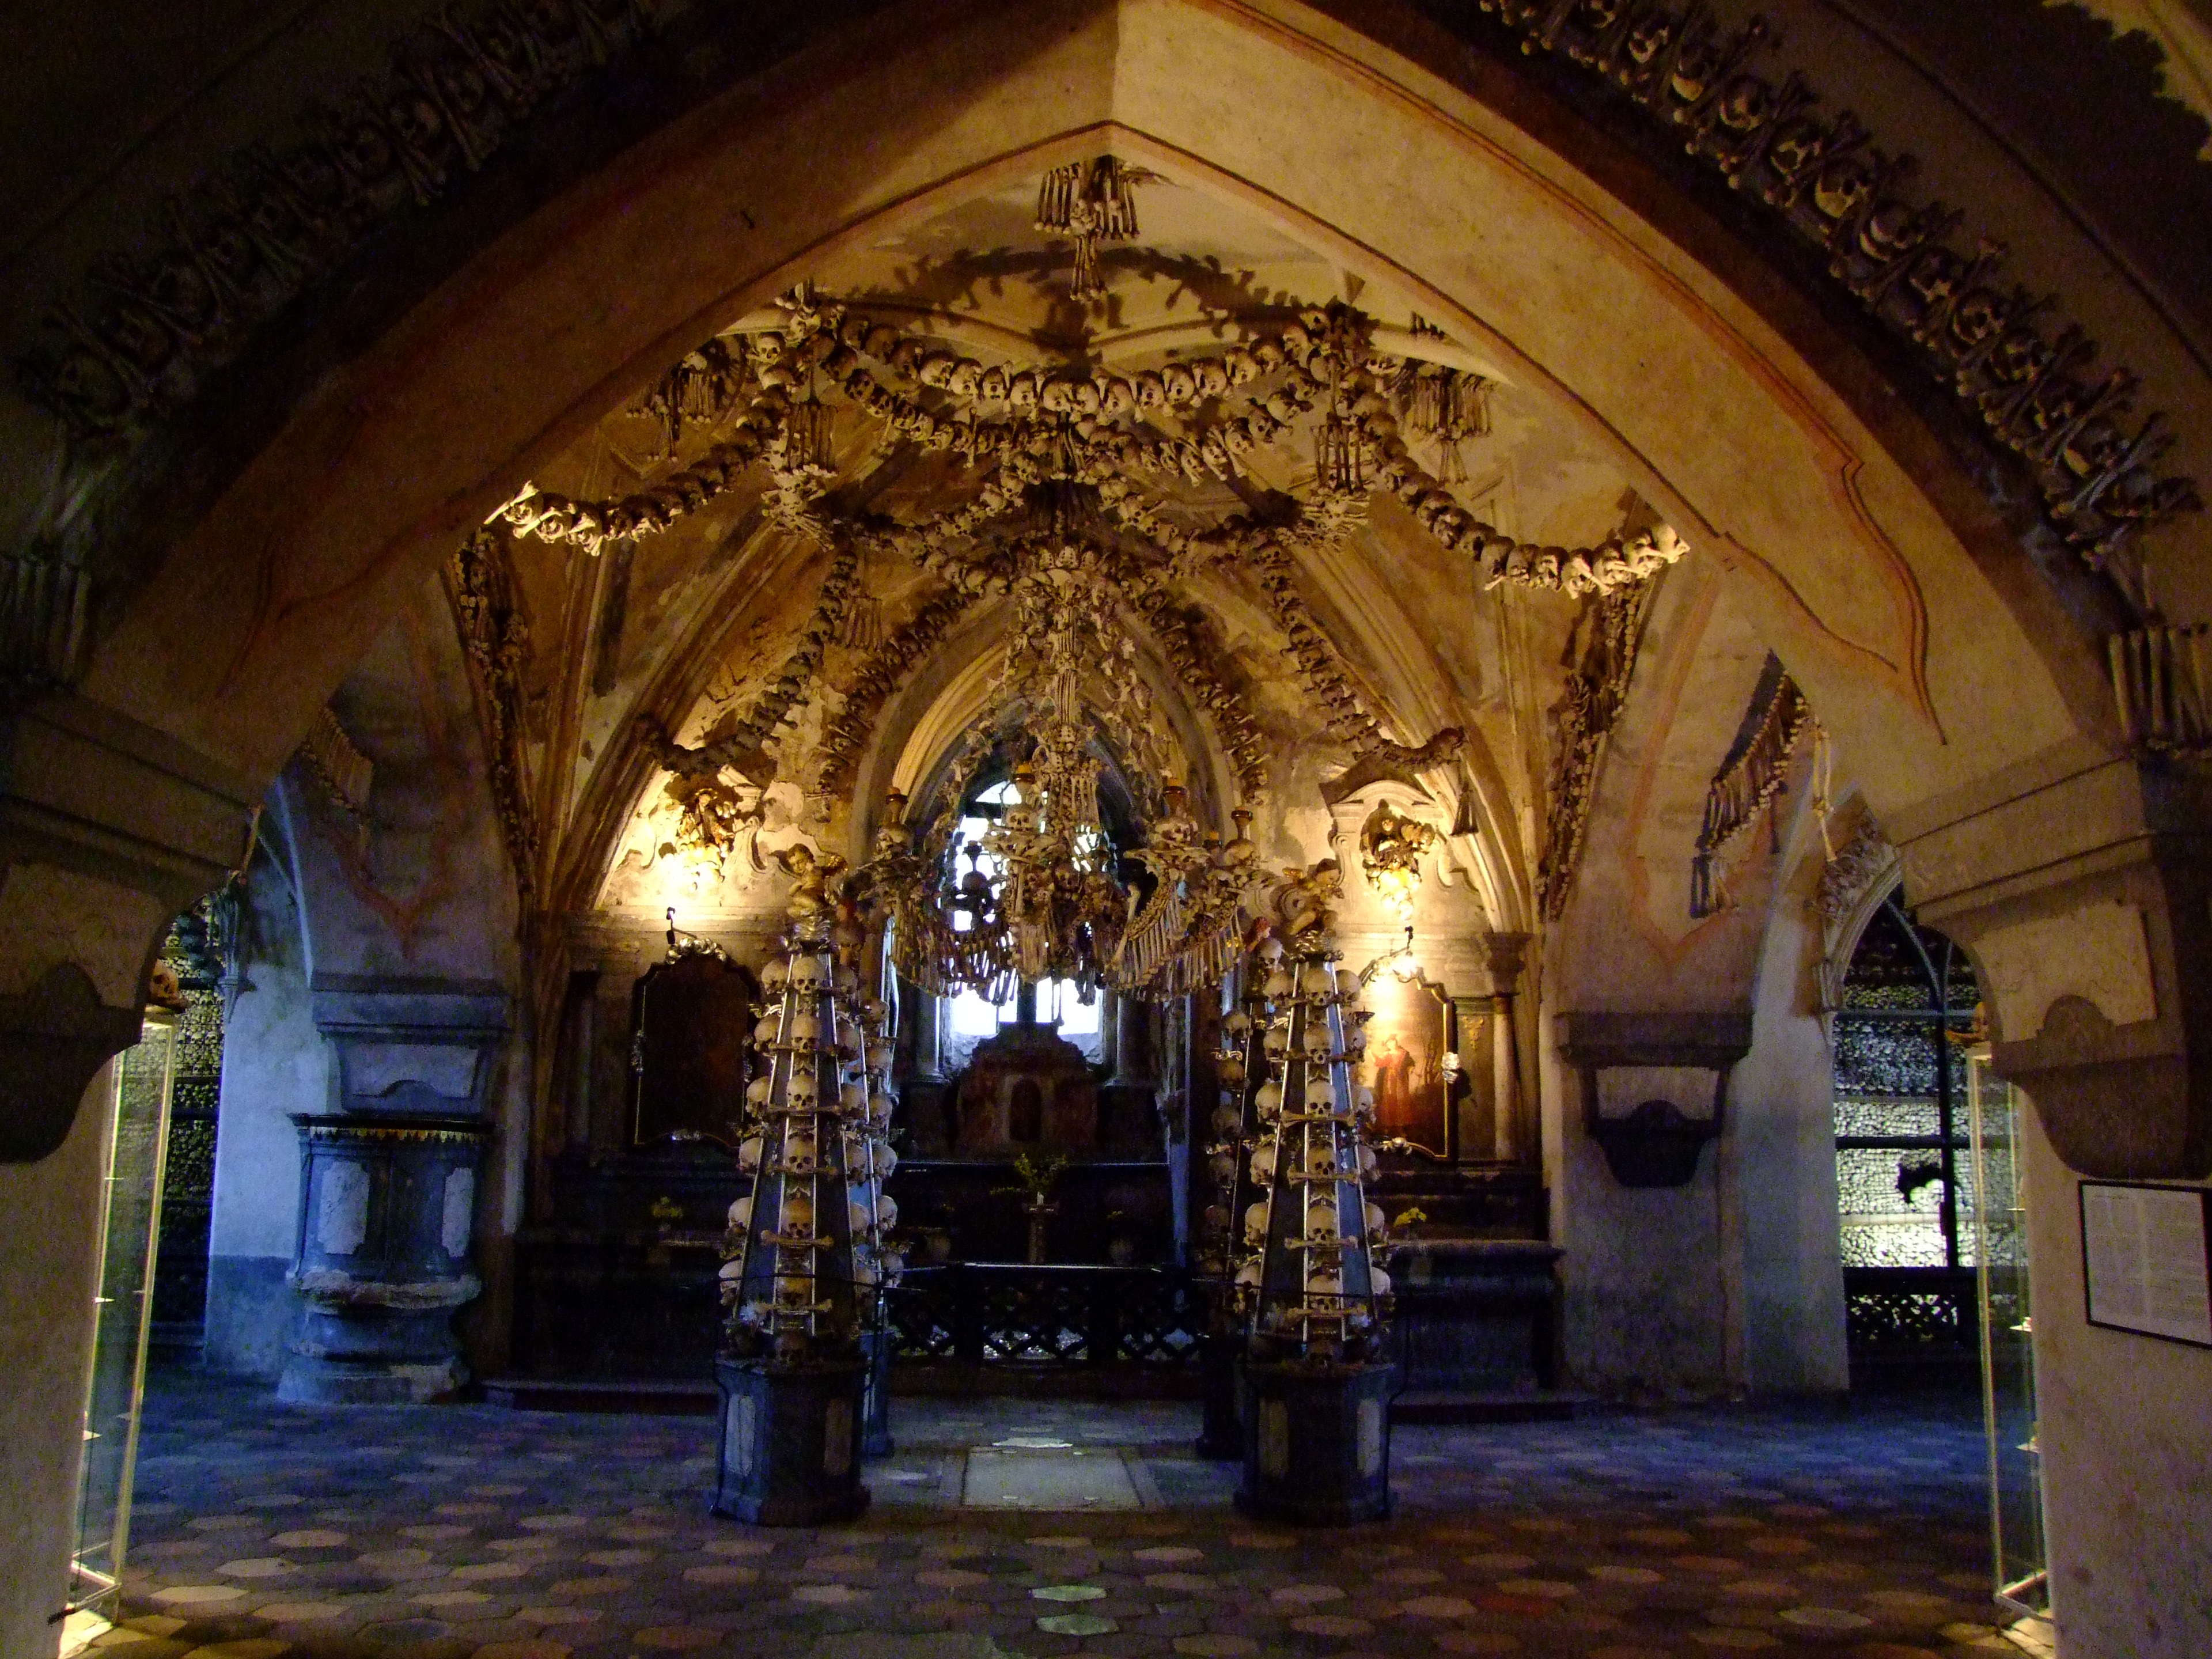 Visit to Kutná Hora and the Sedlec Ossuary